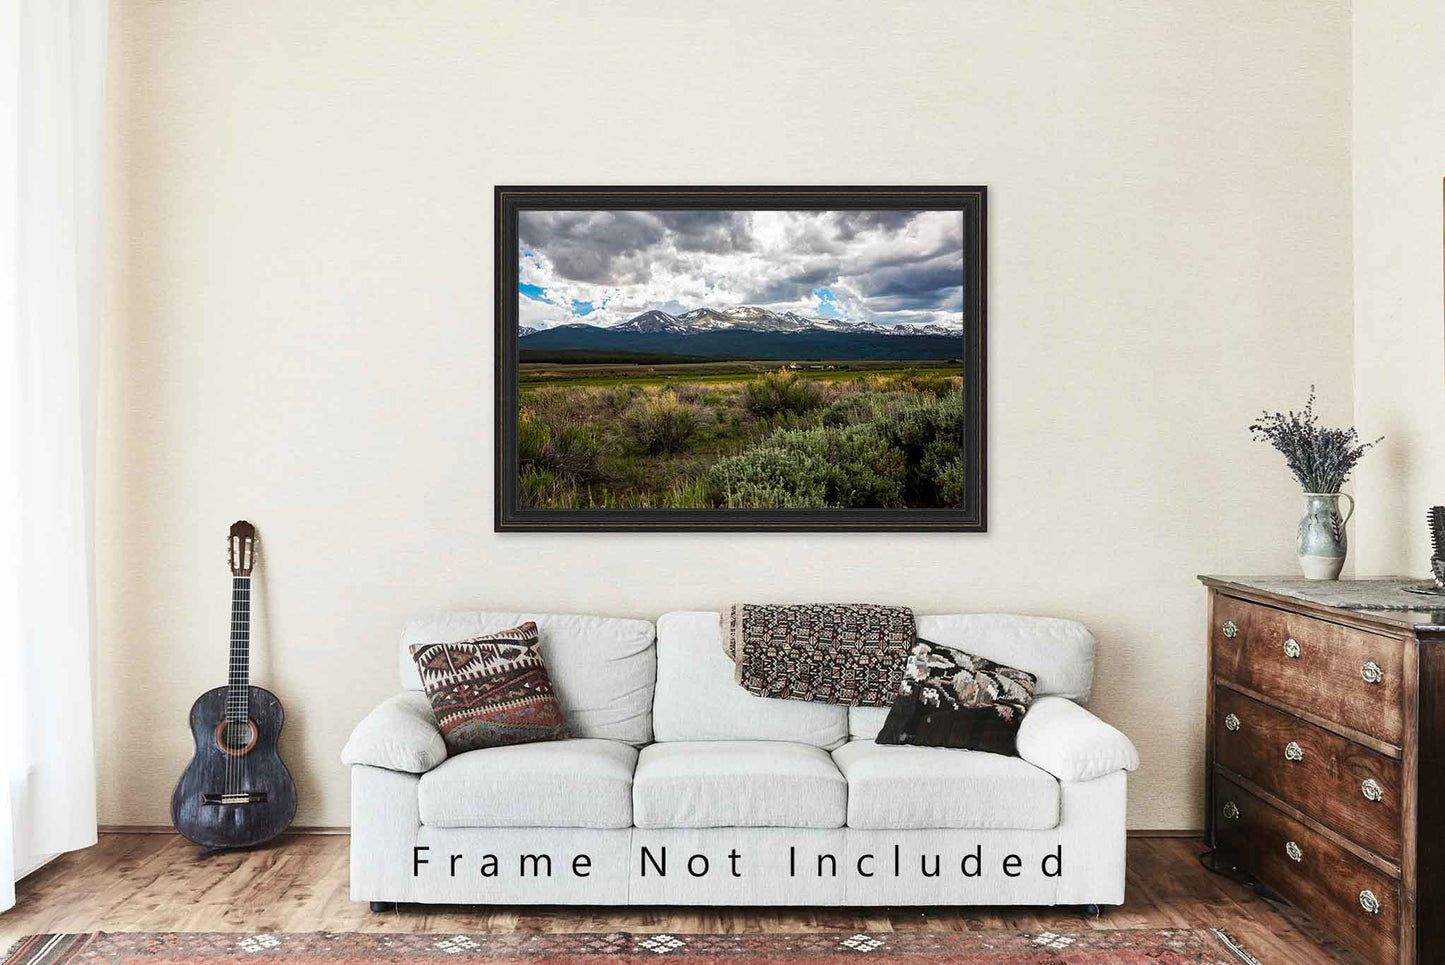 Western Landscape Photography Print - Picture of Mount Massive on Summer Day near Leadville Colorado - Rocky Mountain Wall Art Photo Artwork